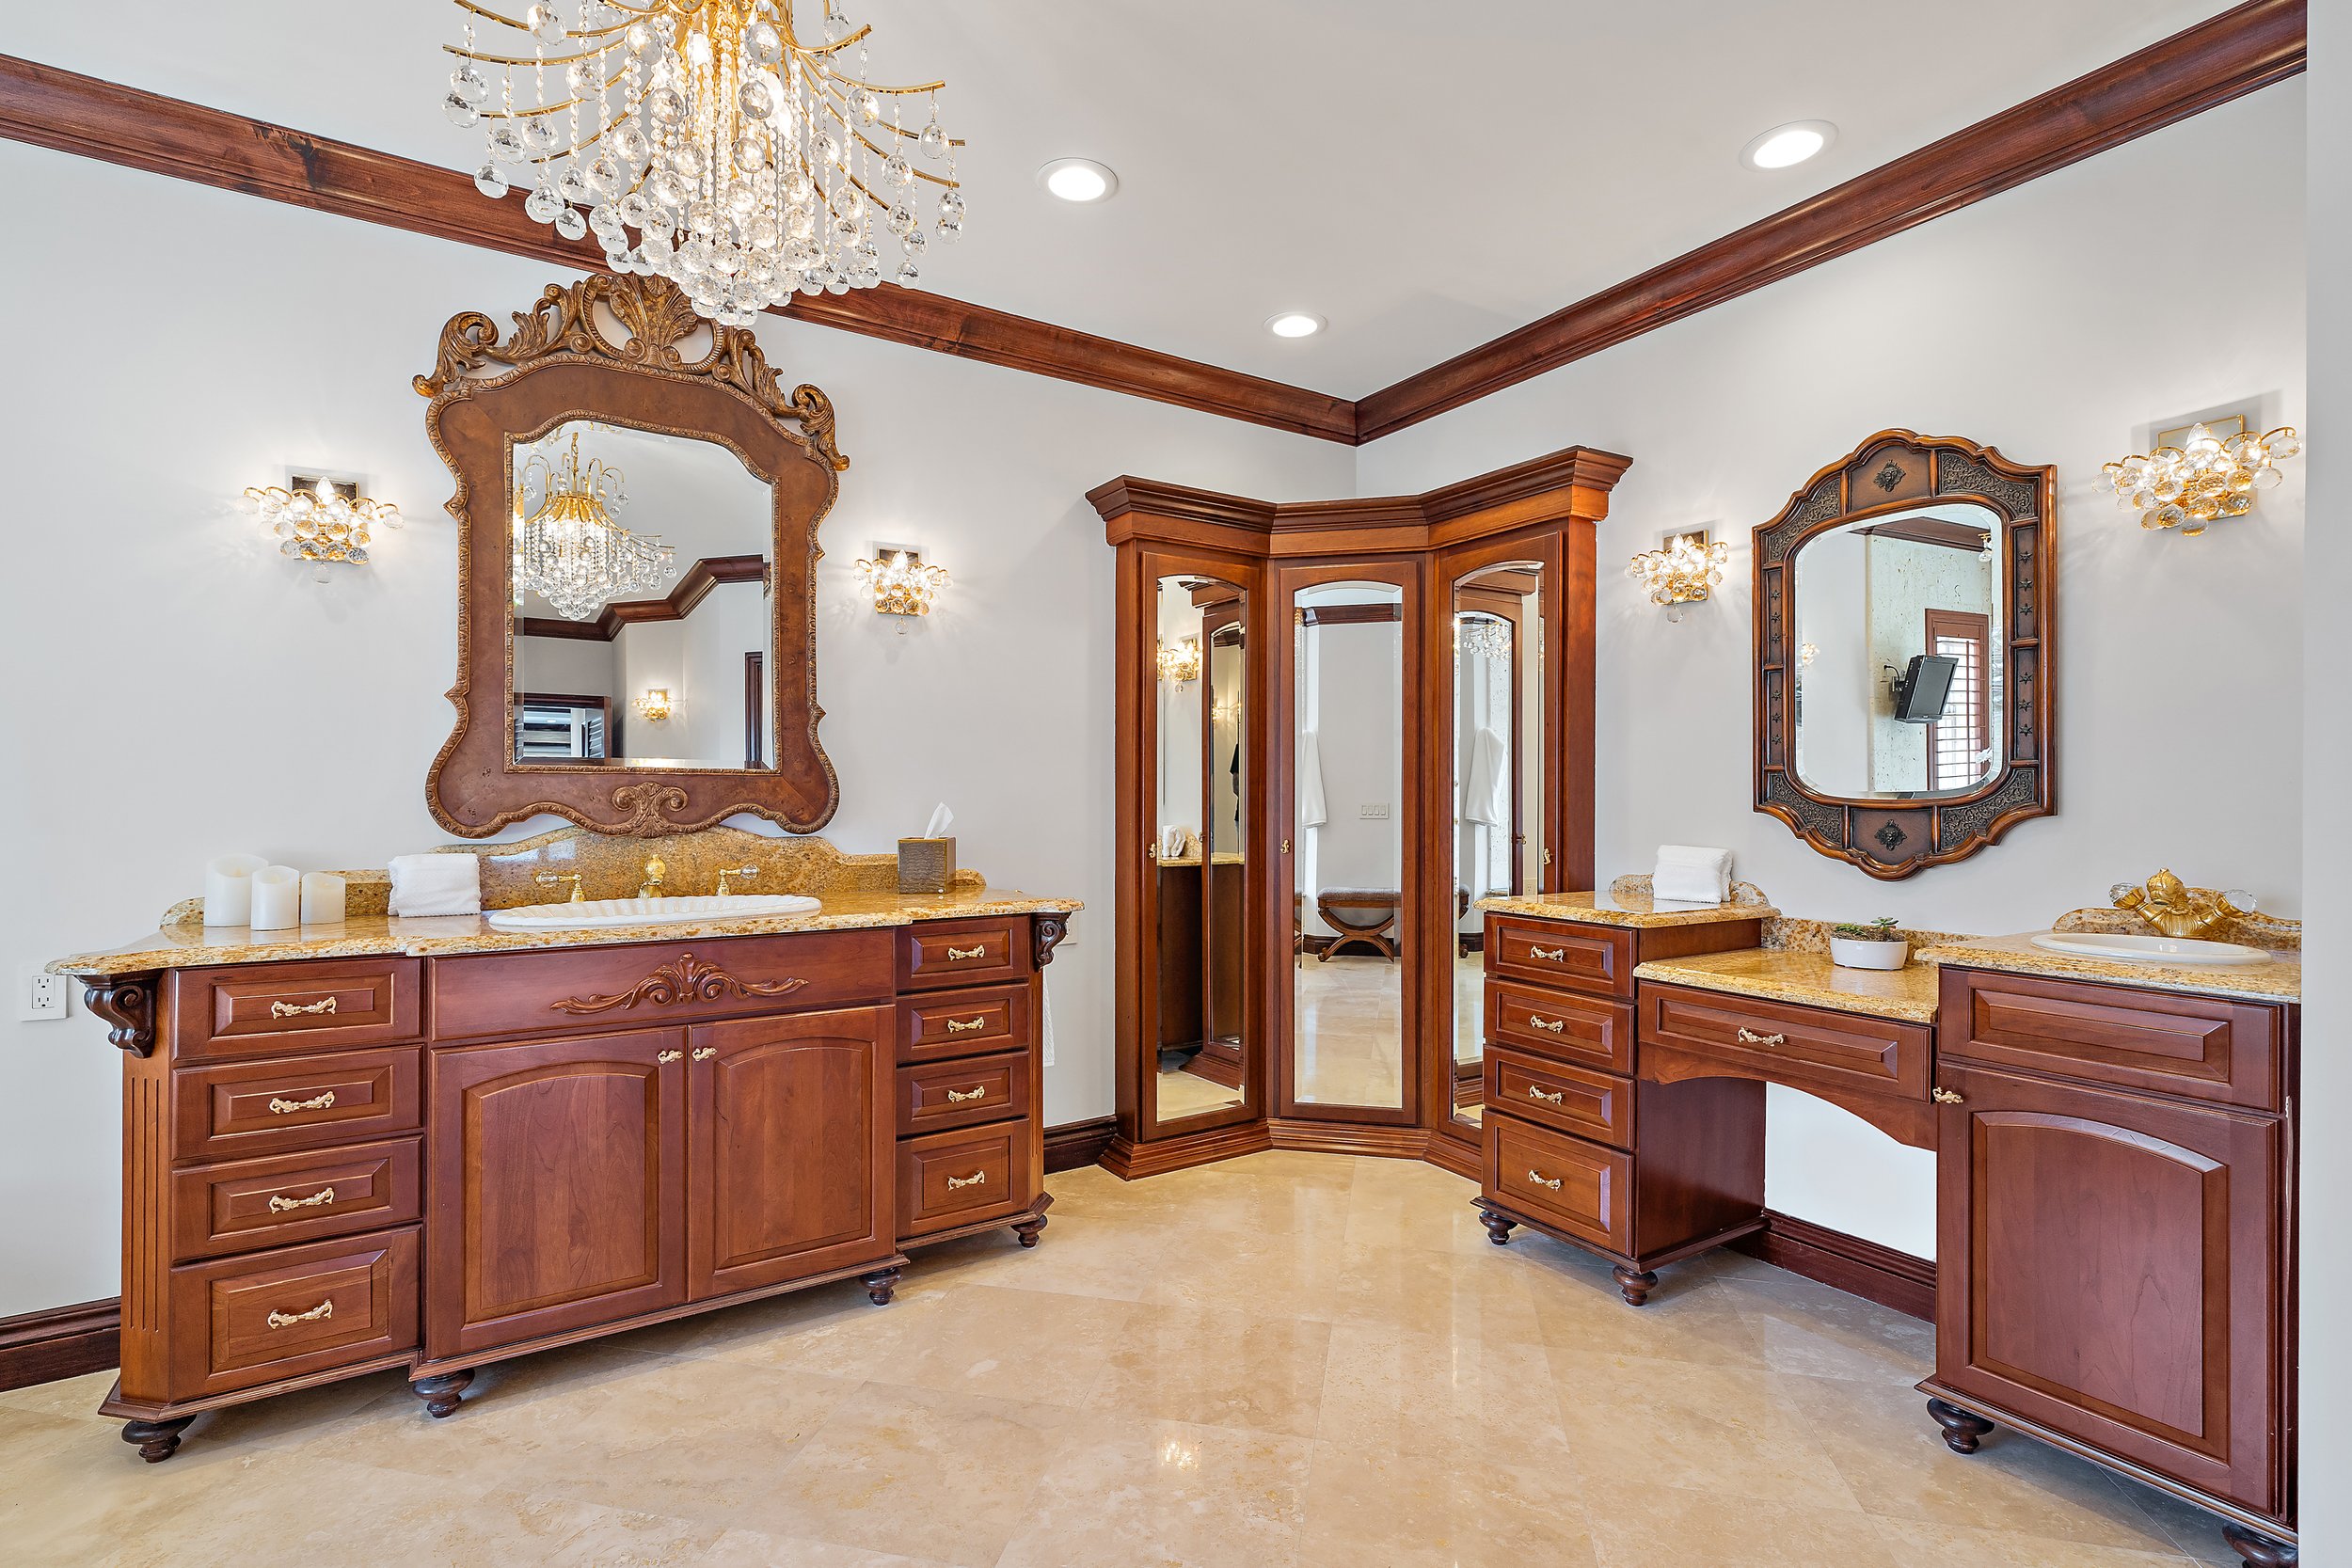 Tour A Jupiter Beachfront Mansion Owned By Clyde R. %22Buzz%22 Gibb Which Is Asking $24.9 Million 128.jpg